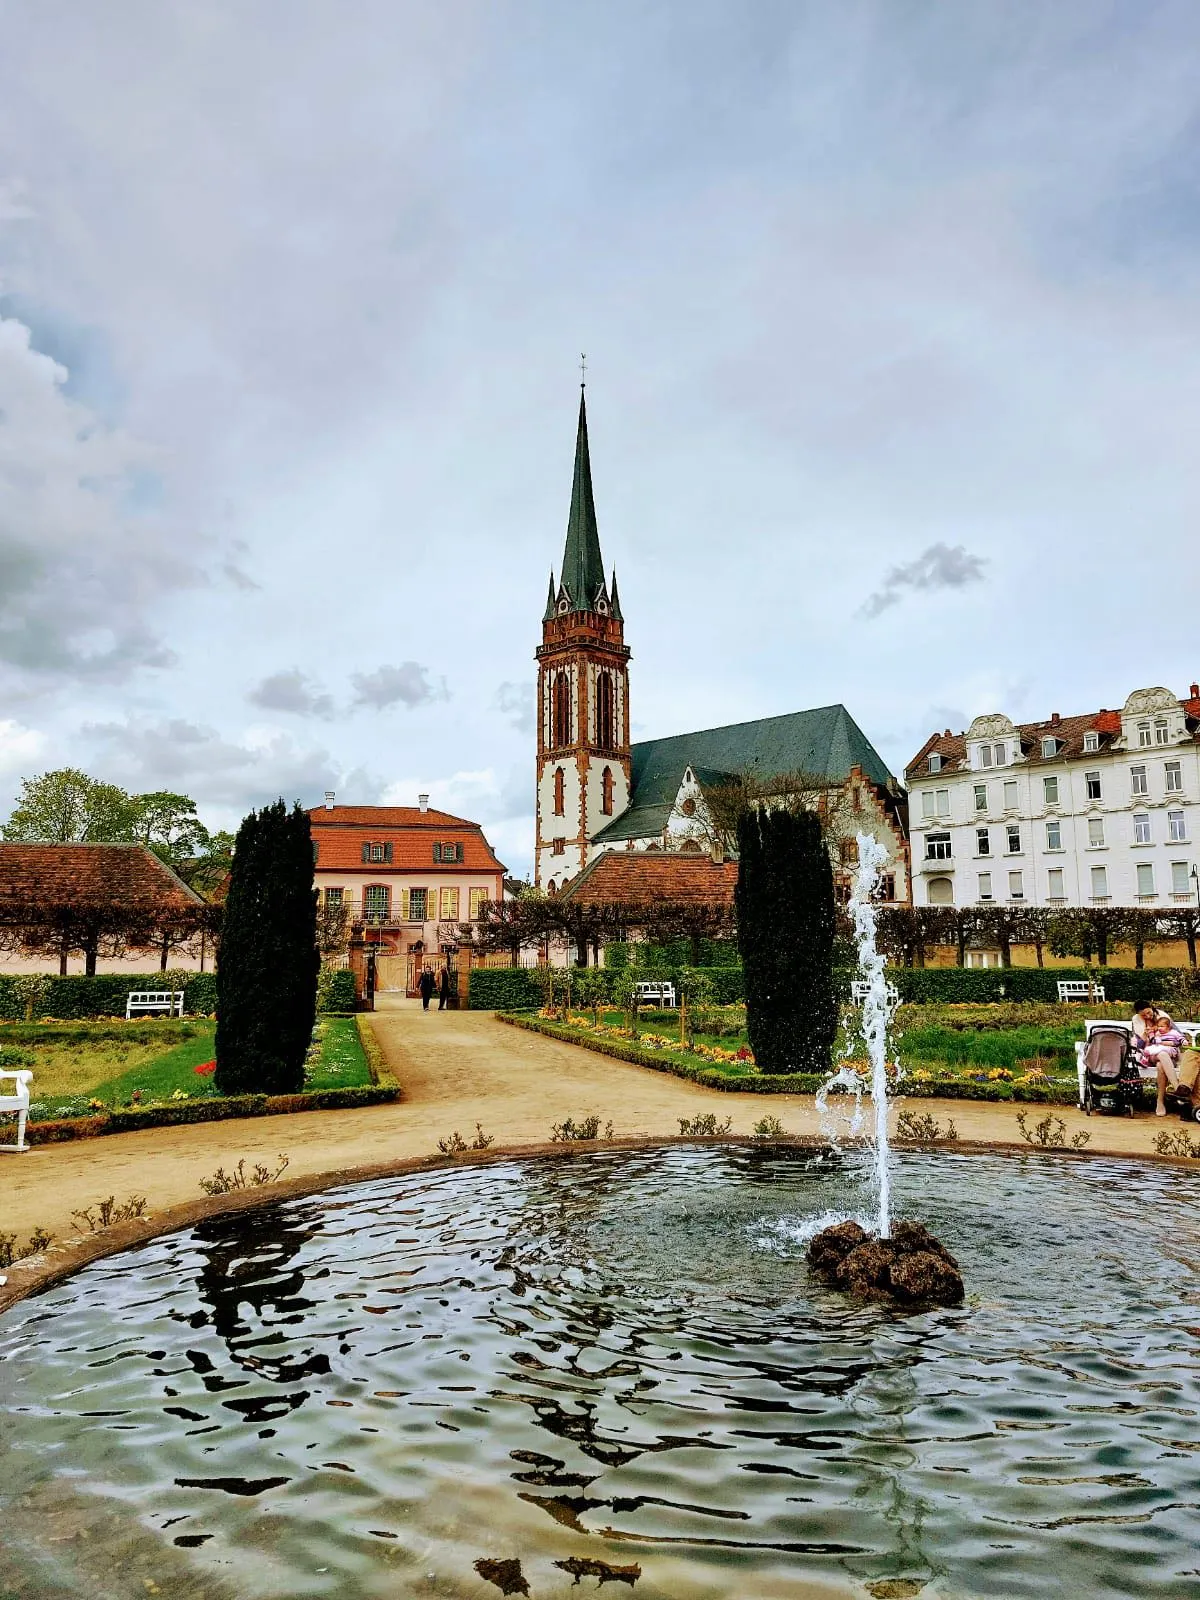 How to spend a day in Darmstadt